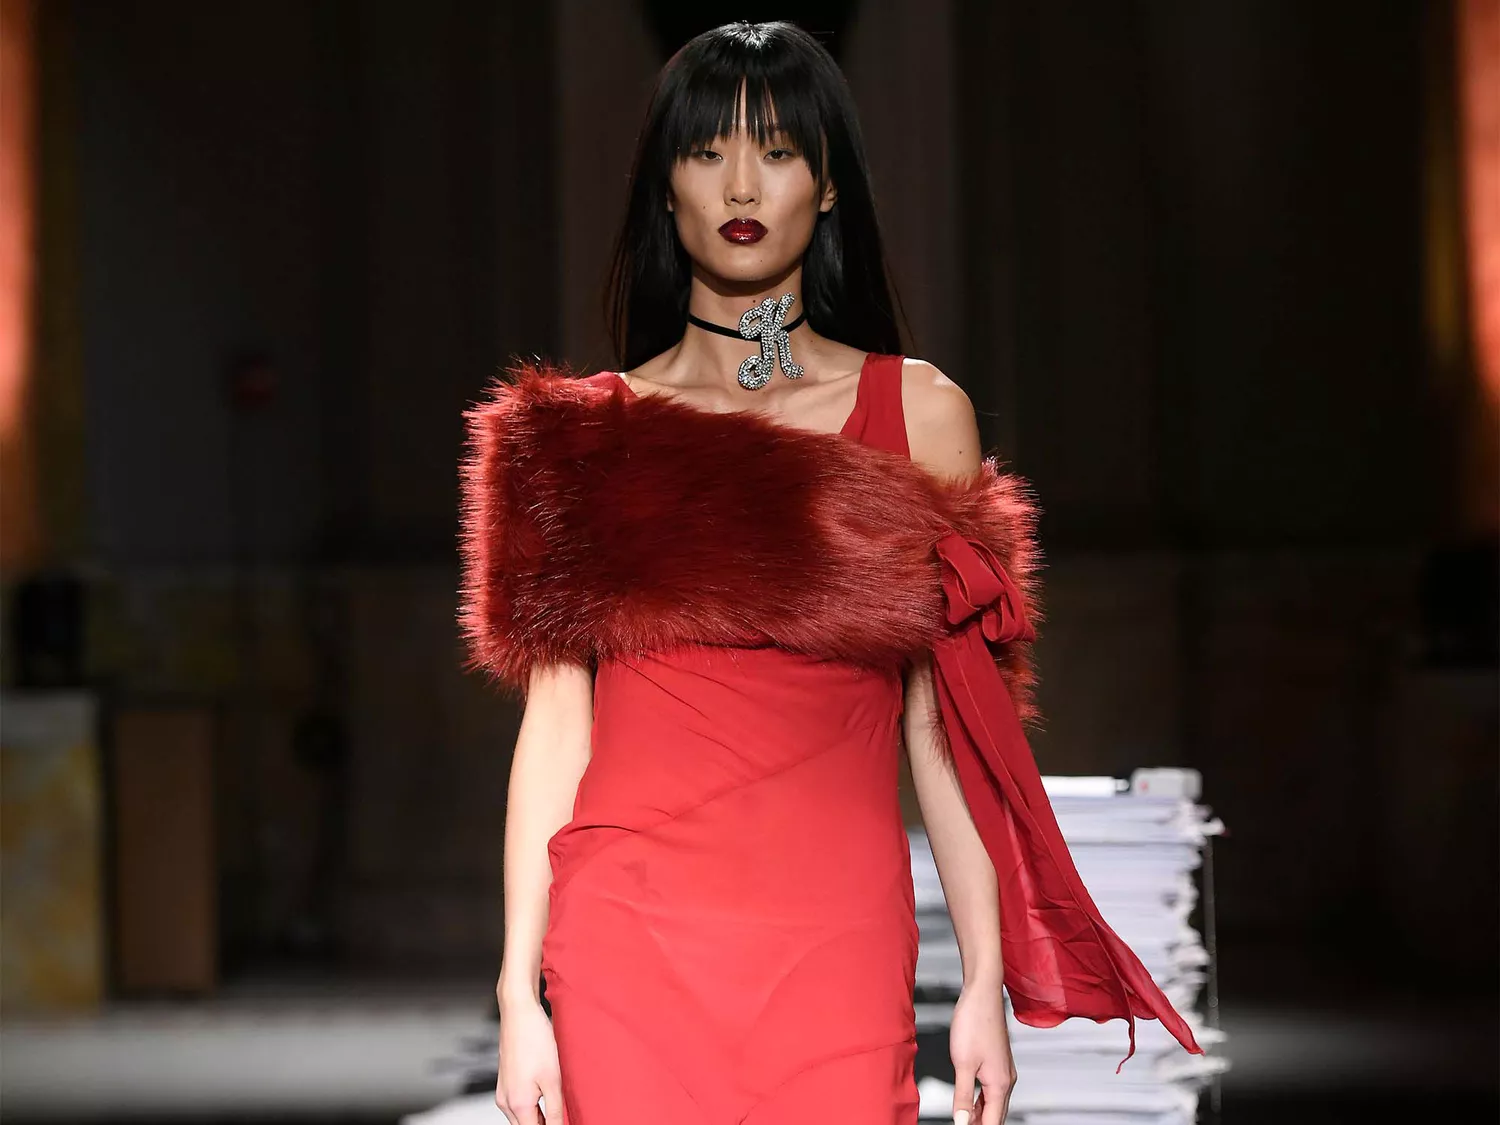 Model wearing a red dress at Kim Shui.